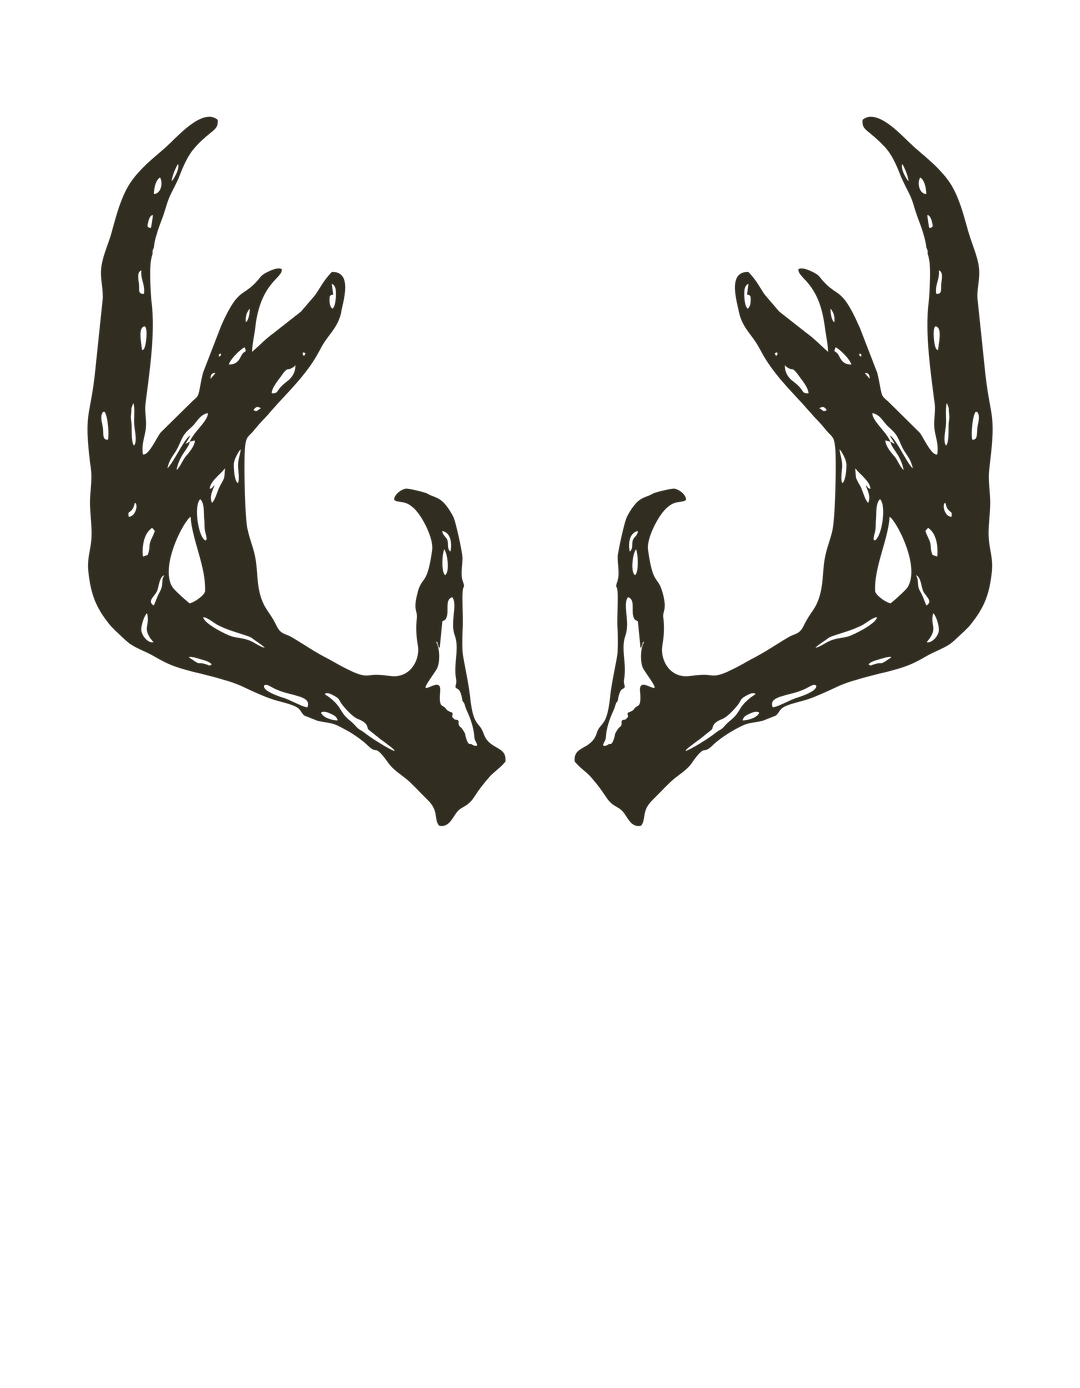 A sketch-style Antler Tee on black background, embodying comfort with 100% ring-spun cotton. Relaxed fit, durable double-needle stitching, and seamless design for a unique, cozy addition to your wardrobe.